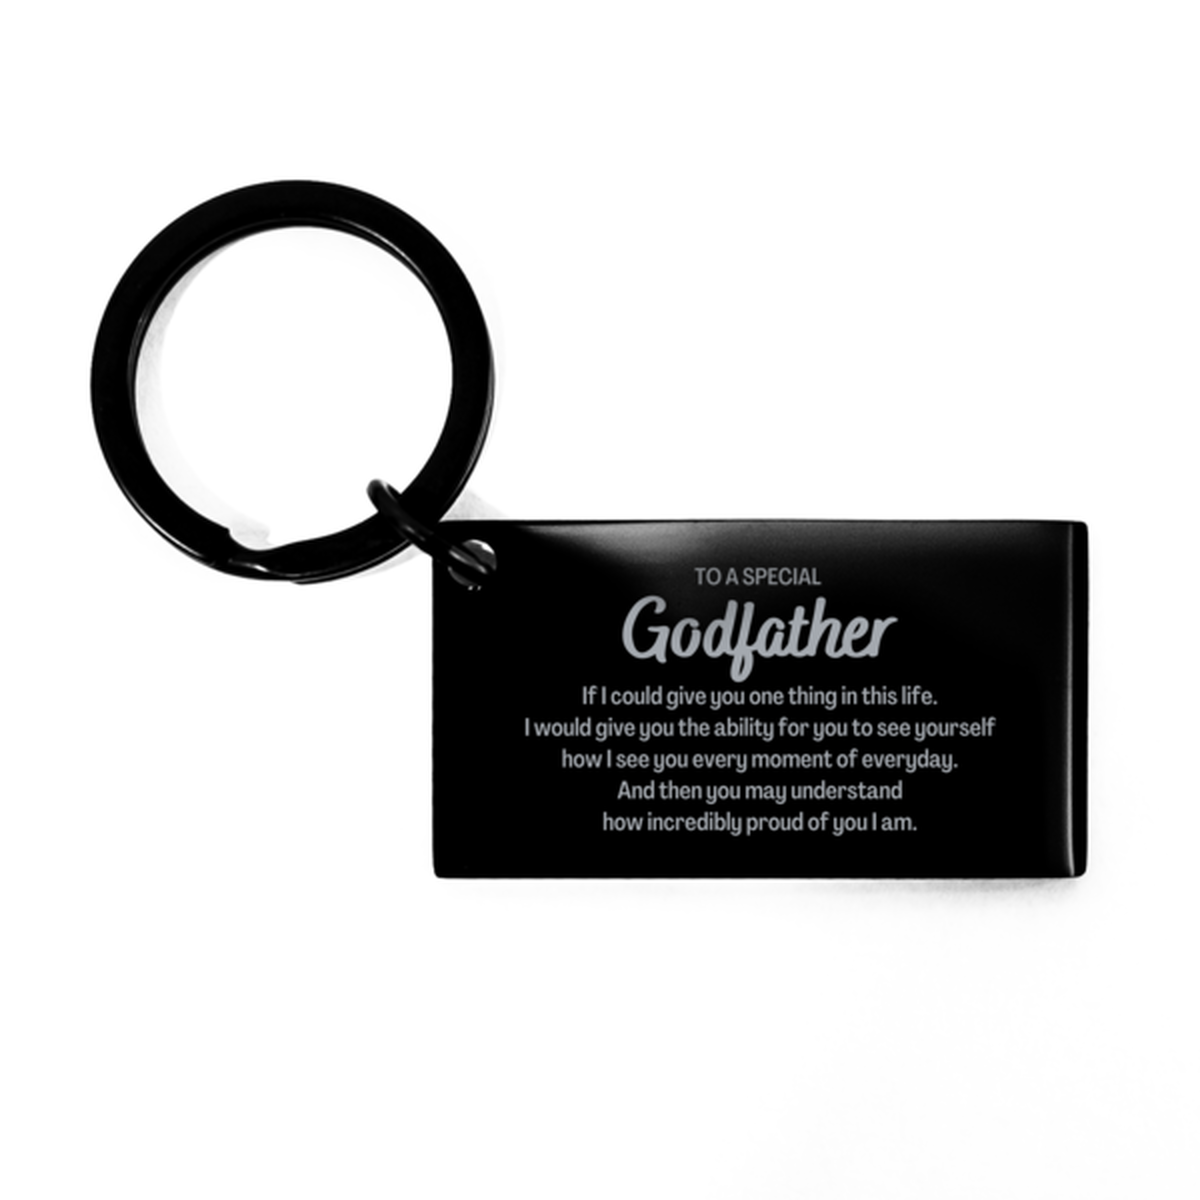 To My Godfather Keychain, Gifts For Godfather Engraved, Inspirational Gifts for Christmas Birthday, Epic Gifts for Godfather To A Special Godfather how incredibly proud of you I am